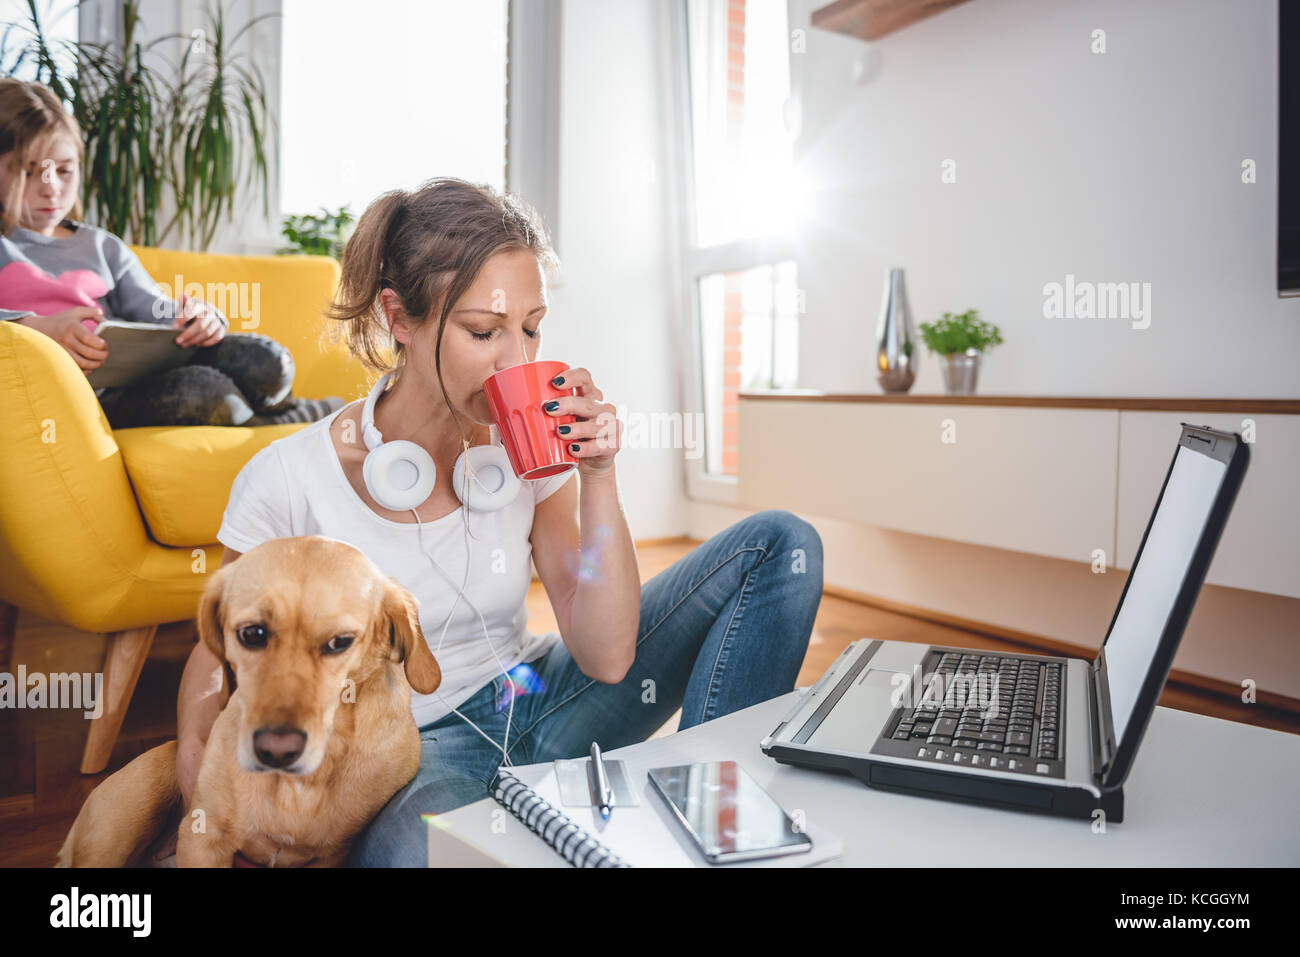 Woman wearing white shirt sitting on the floor by the table drinking coffee and petting a dog Stock Photo